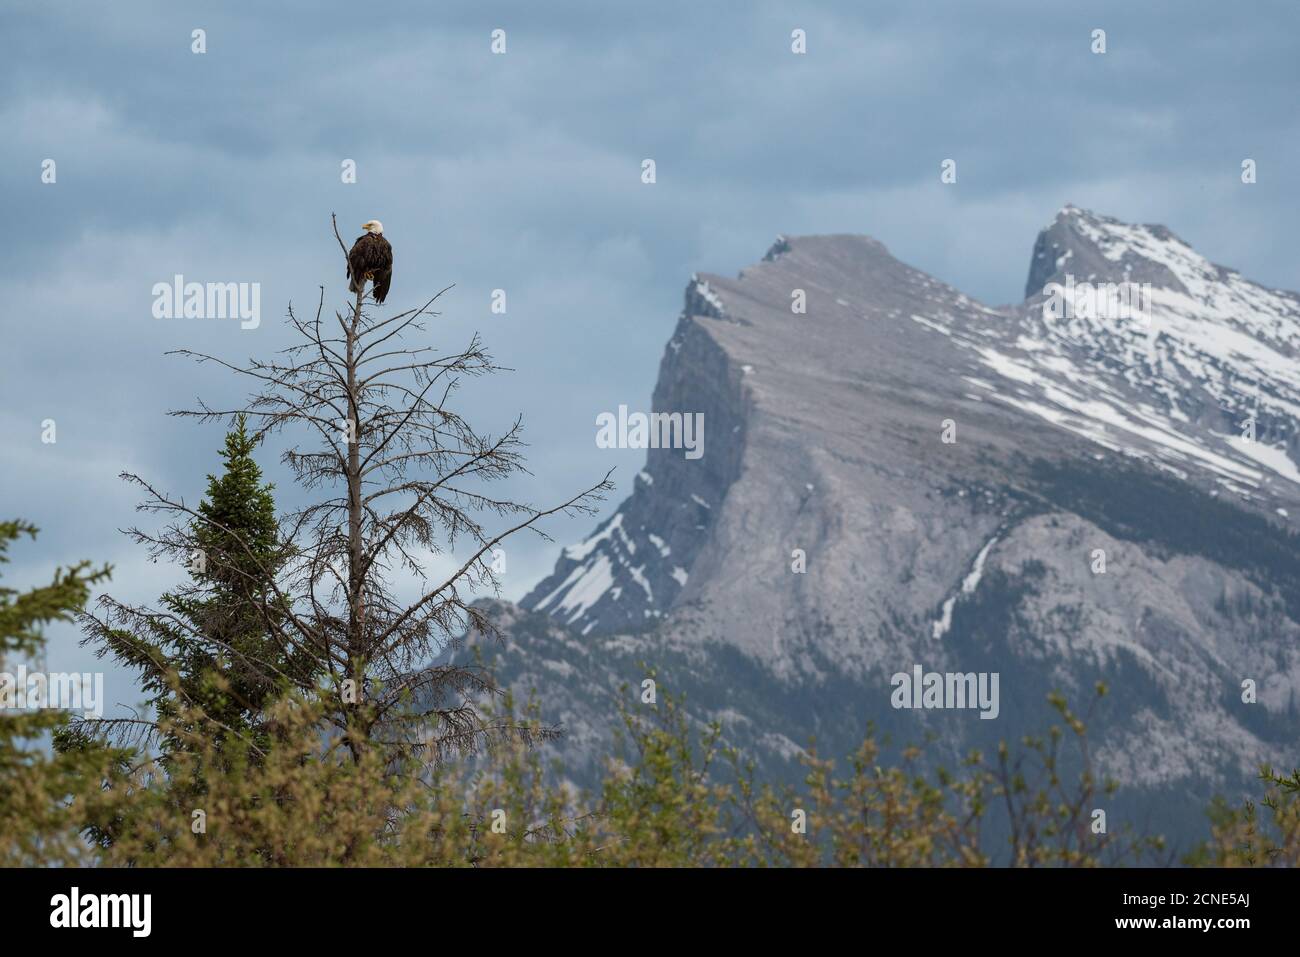 Bald Eagle with Mount Rundle in the background, Banff National Park, UNESCO World Heritage Site, Alberta, Canadian Rockies, Canada Stock Photo